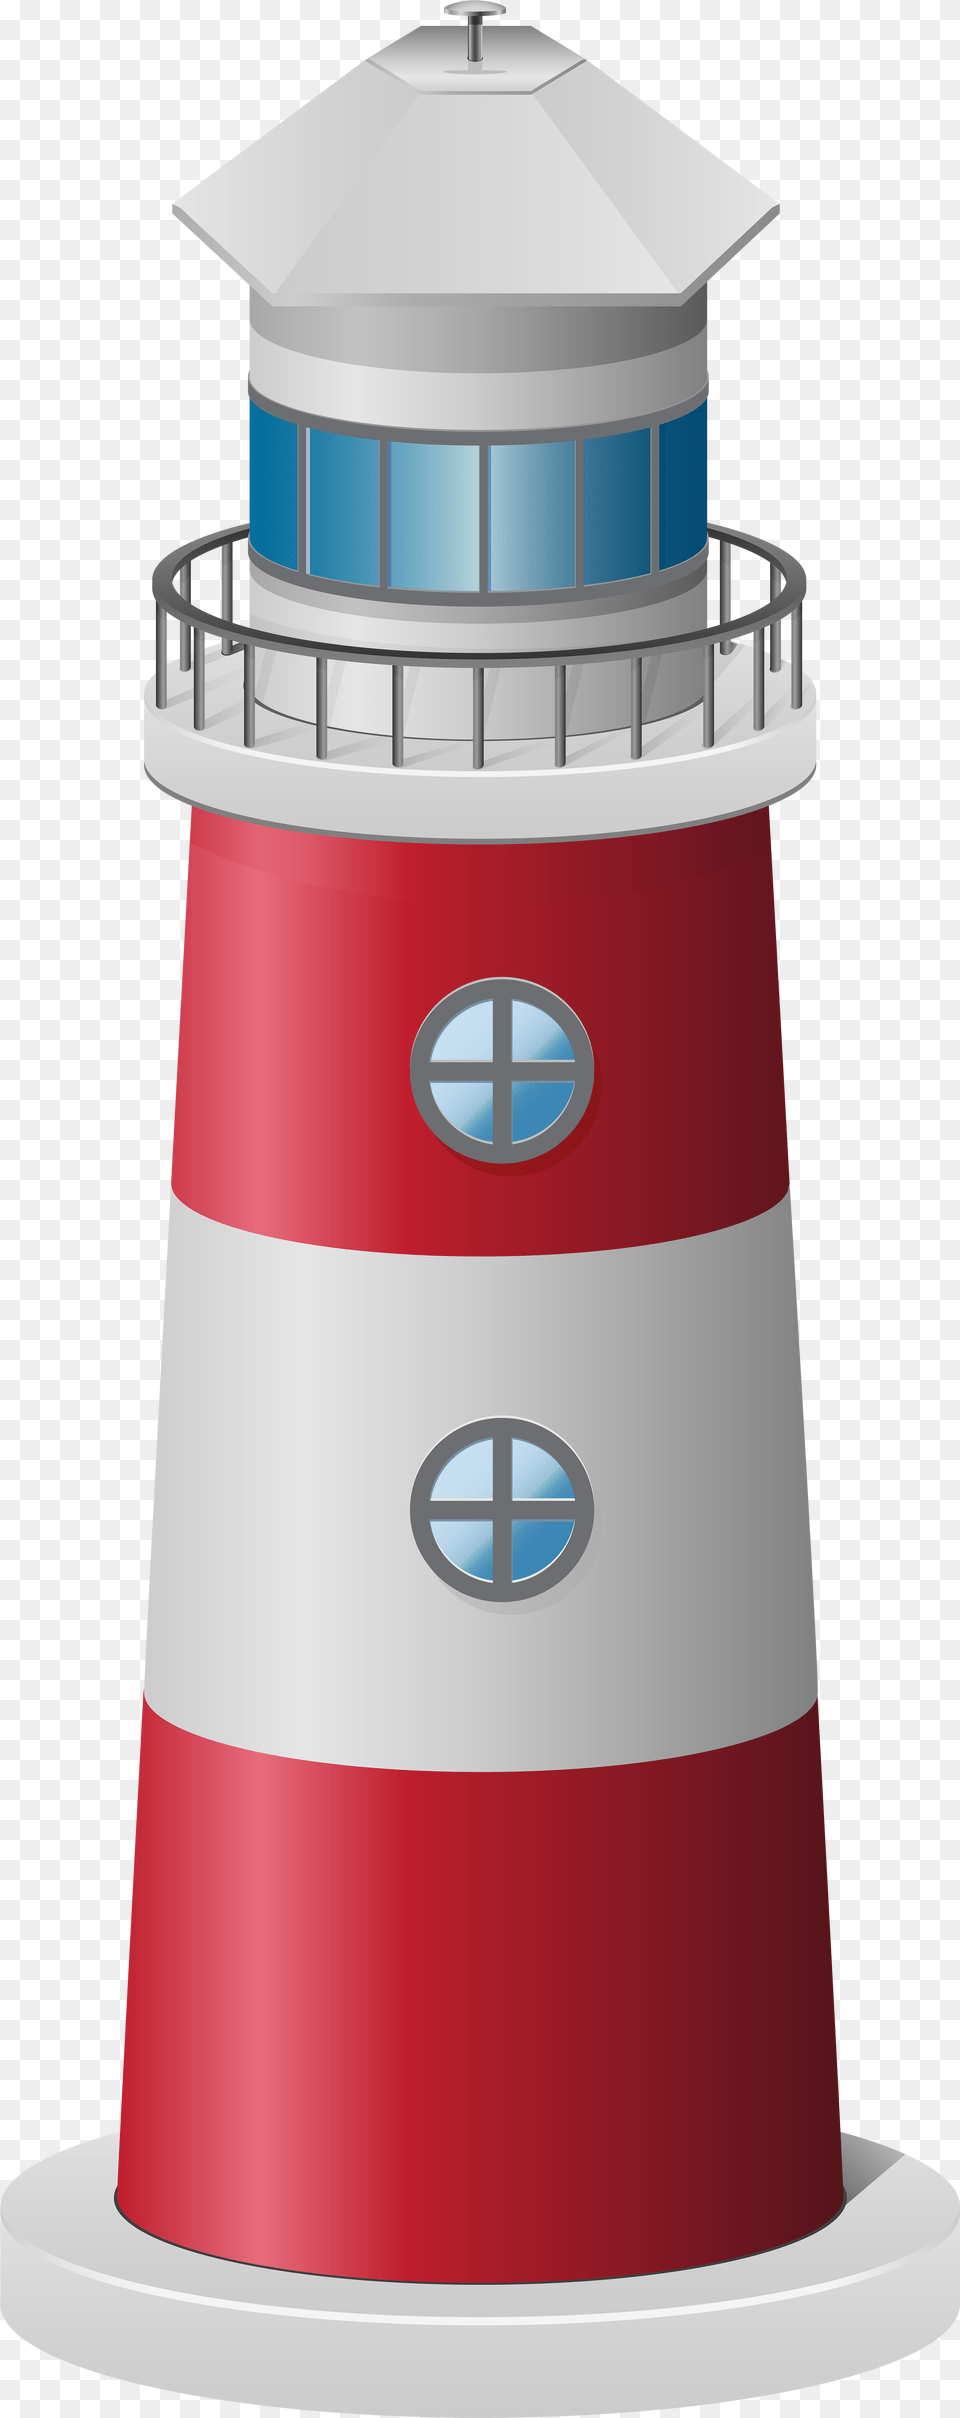 Lighthouse Image Background Lighthouse Clipart, Architecture, Building, Tower, Beacon Free Transparent Png